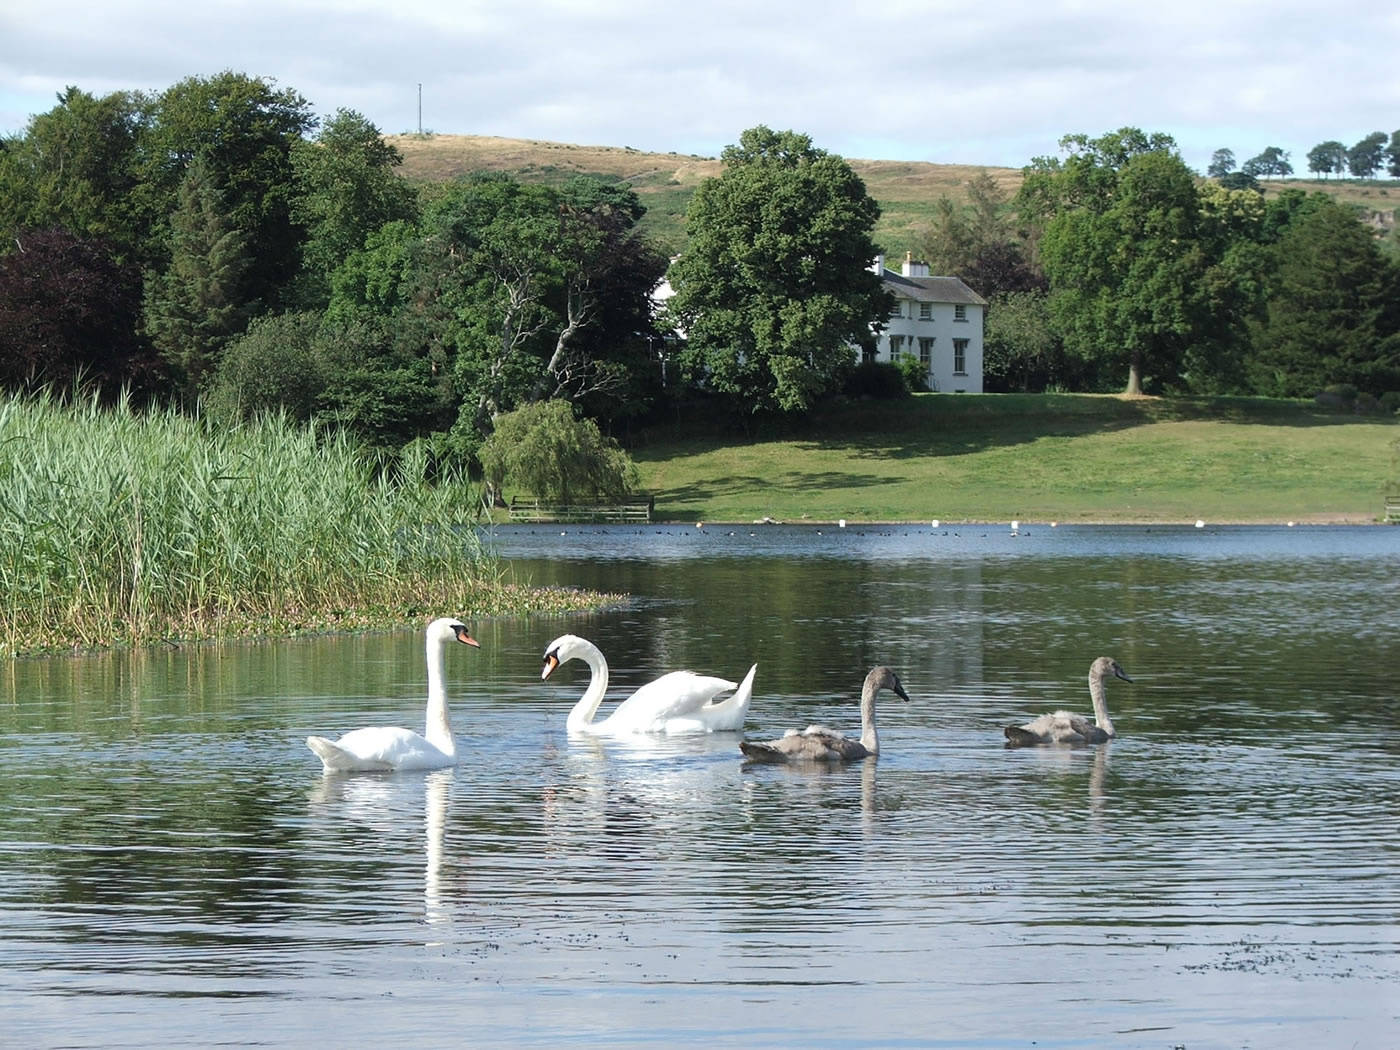 Picture of swans on a scenic loch in Fife.